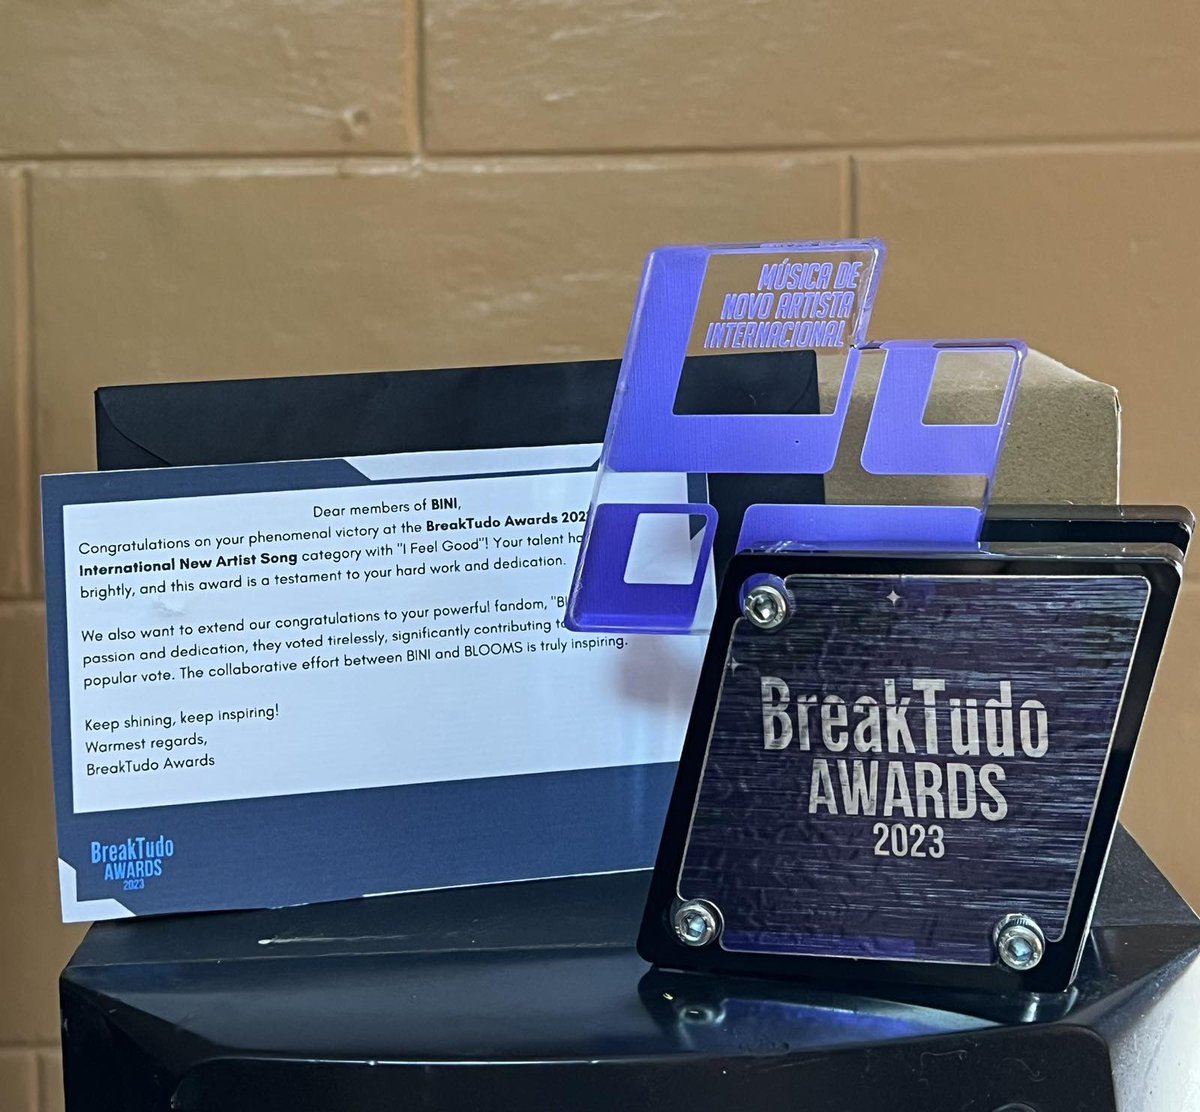 JUST ARRIVED IN THE MAIL - From Brazil! @BINI_ph’s trophy for ‘Musica De Novo Arista Internacional (International New Artist Song)’ from the BreakTudo Awards 2023 🤍 Watch their BreakTudo Awards Performance Video for ‘I Feel Good’ here: 🔗 youtu.be/b_AZQiYJxW0 #BINIph